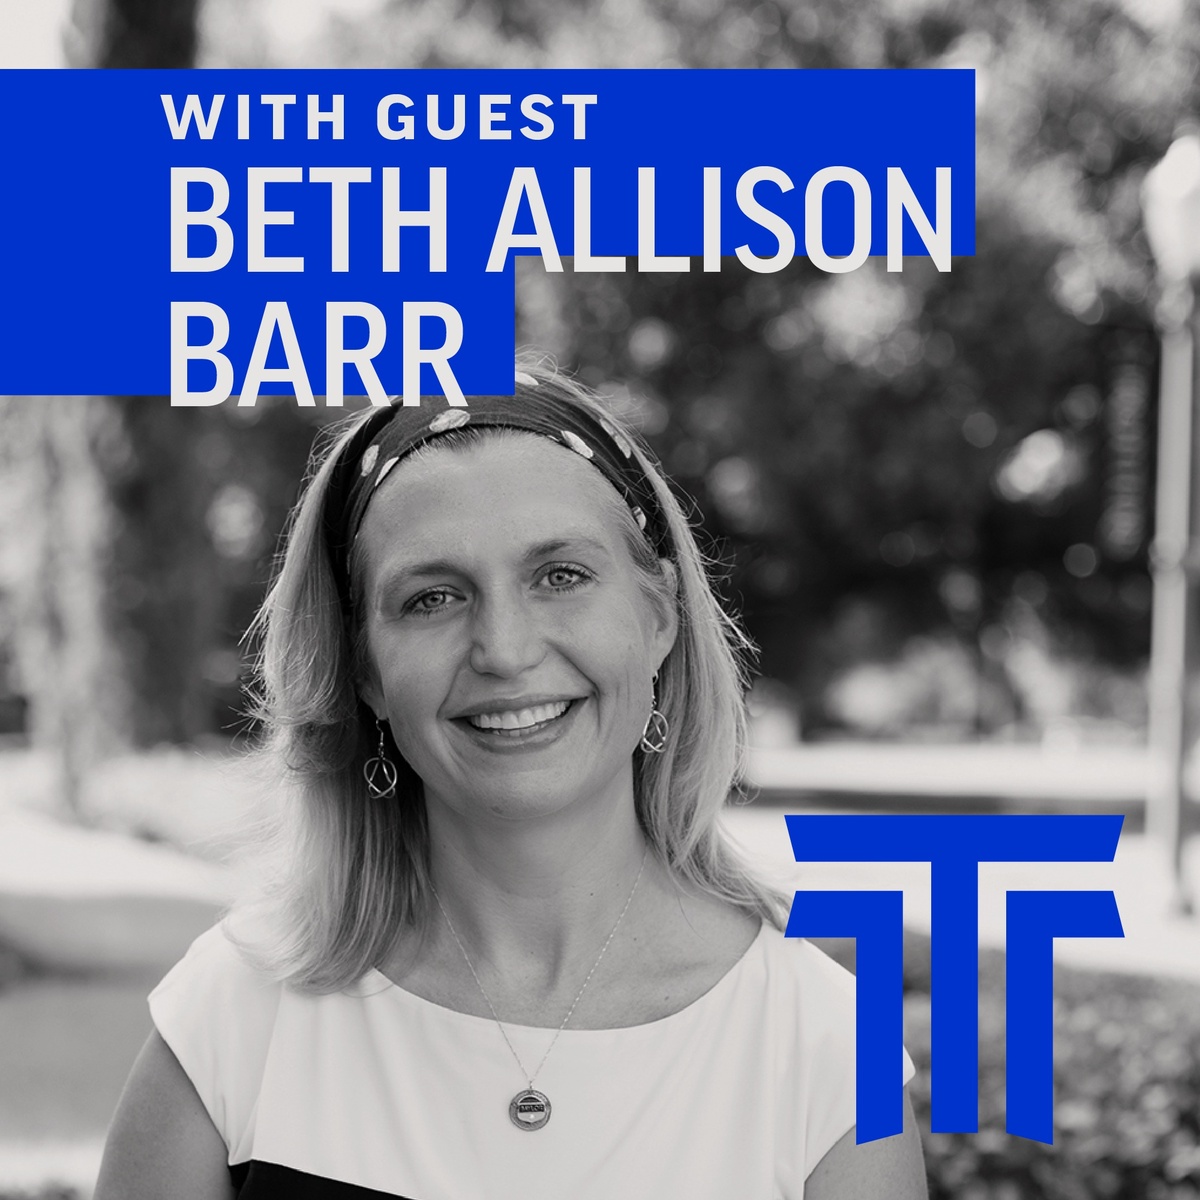 Beth Allison Barr: The Role of Women in the Church